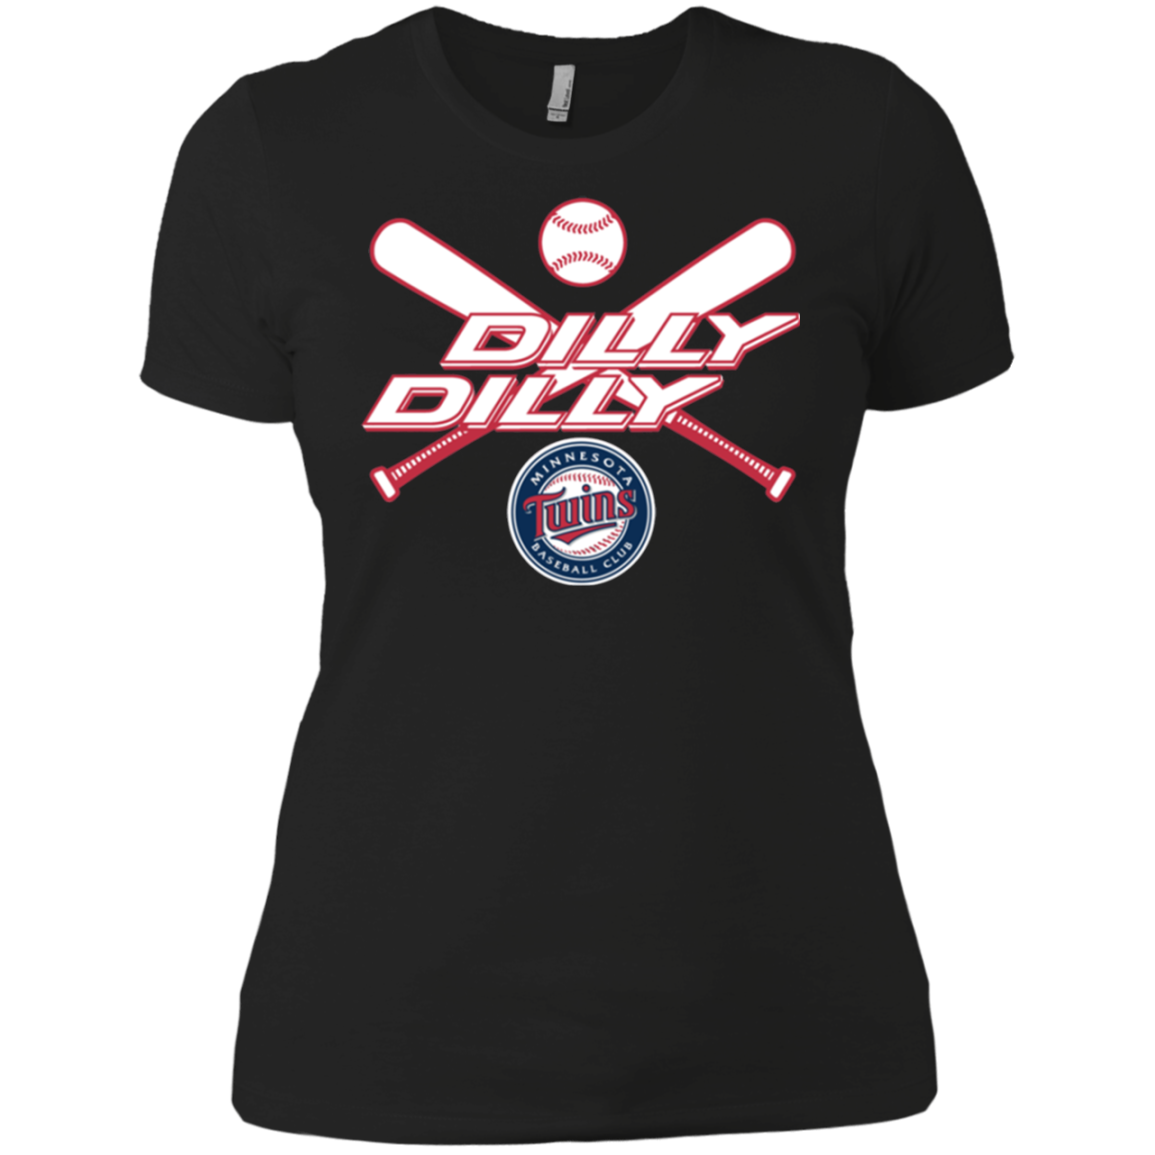 Dilly Dilly Minnesota Twins Baseball T-shirt For 